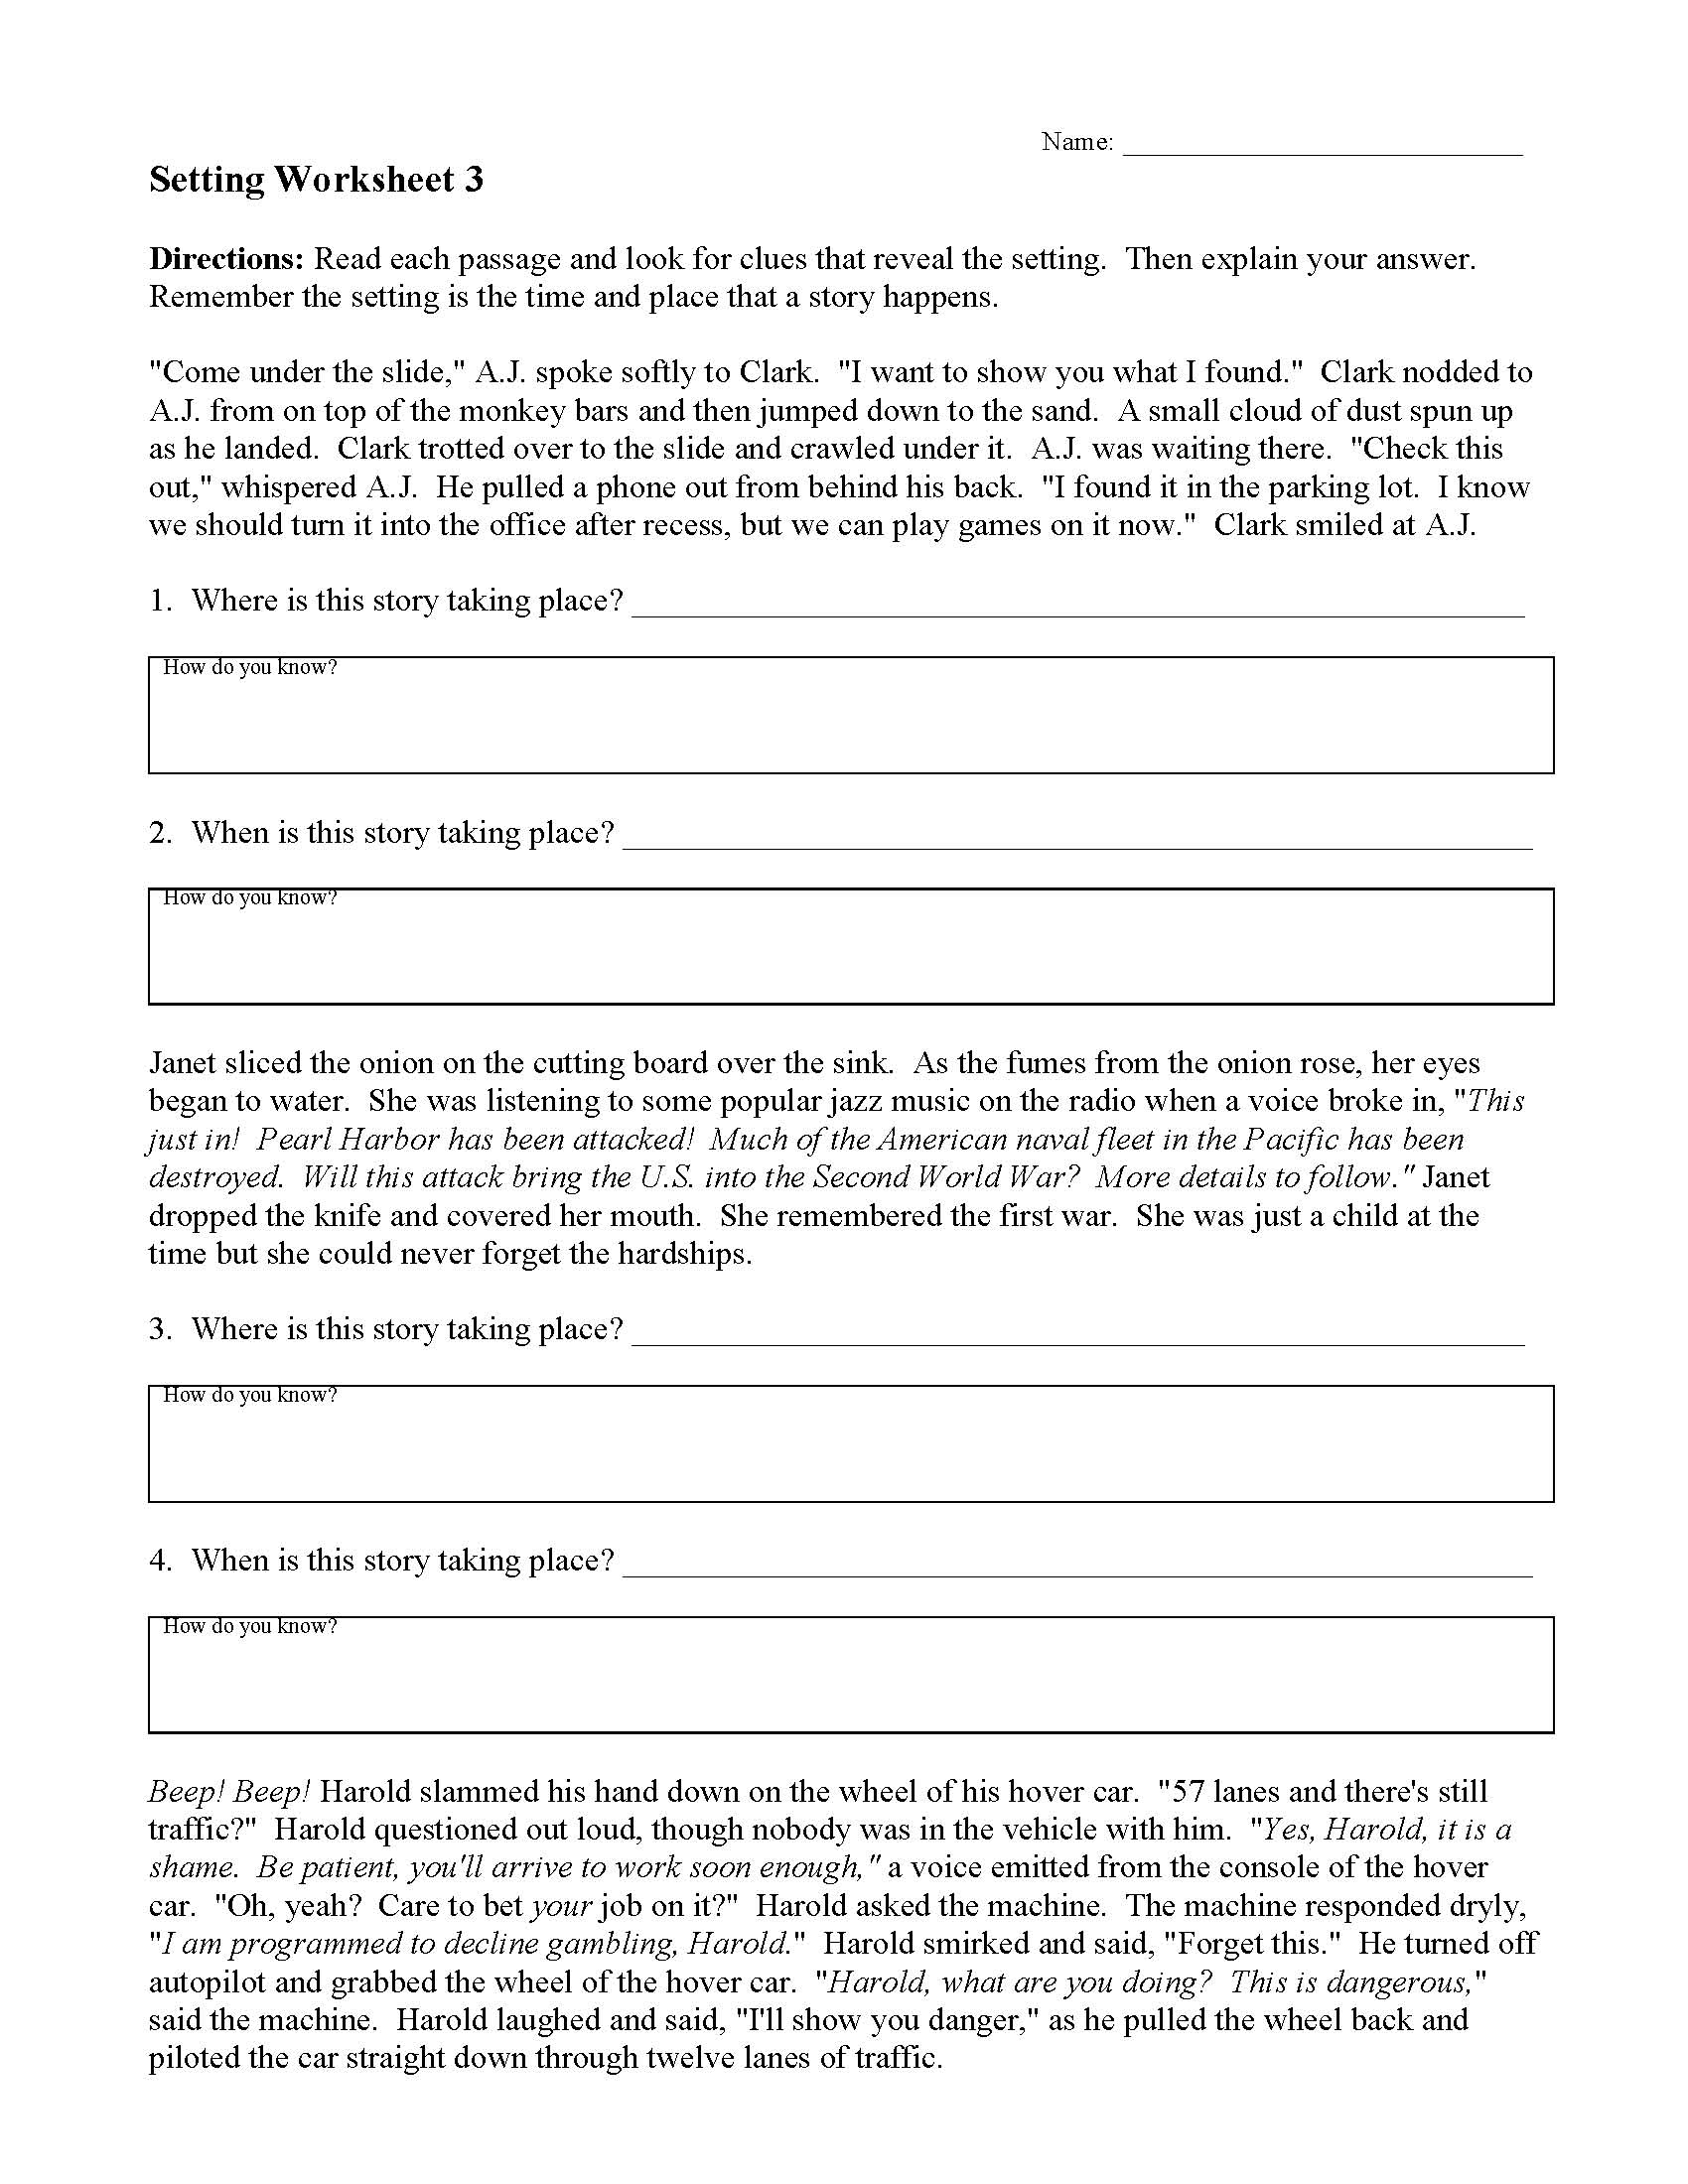 This is a preview image of Setting Worksheet 3. Click on it to enlarge it or view the source file.